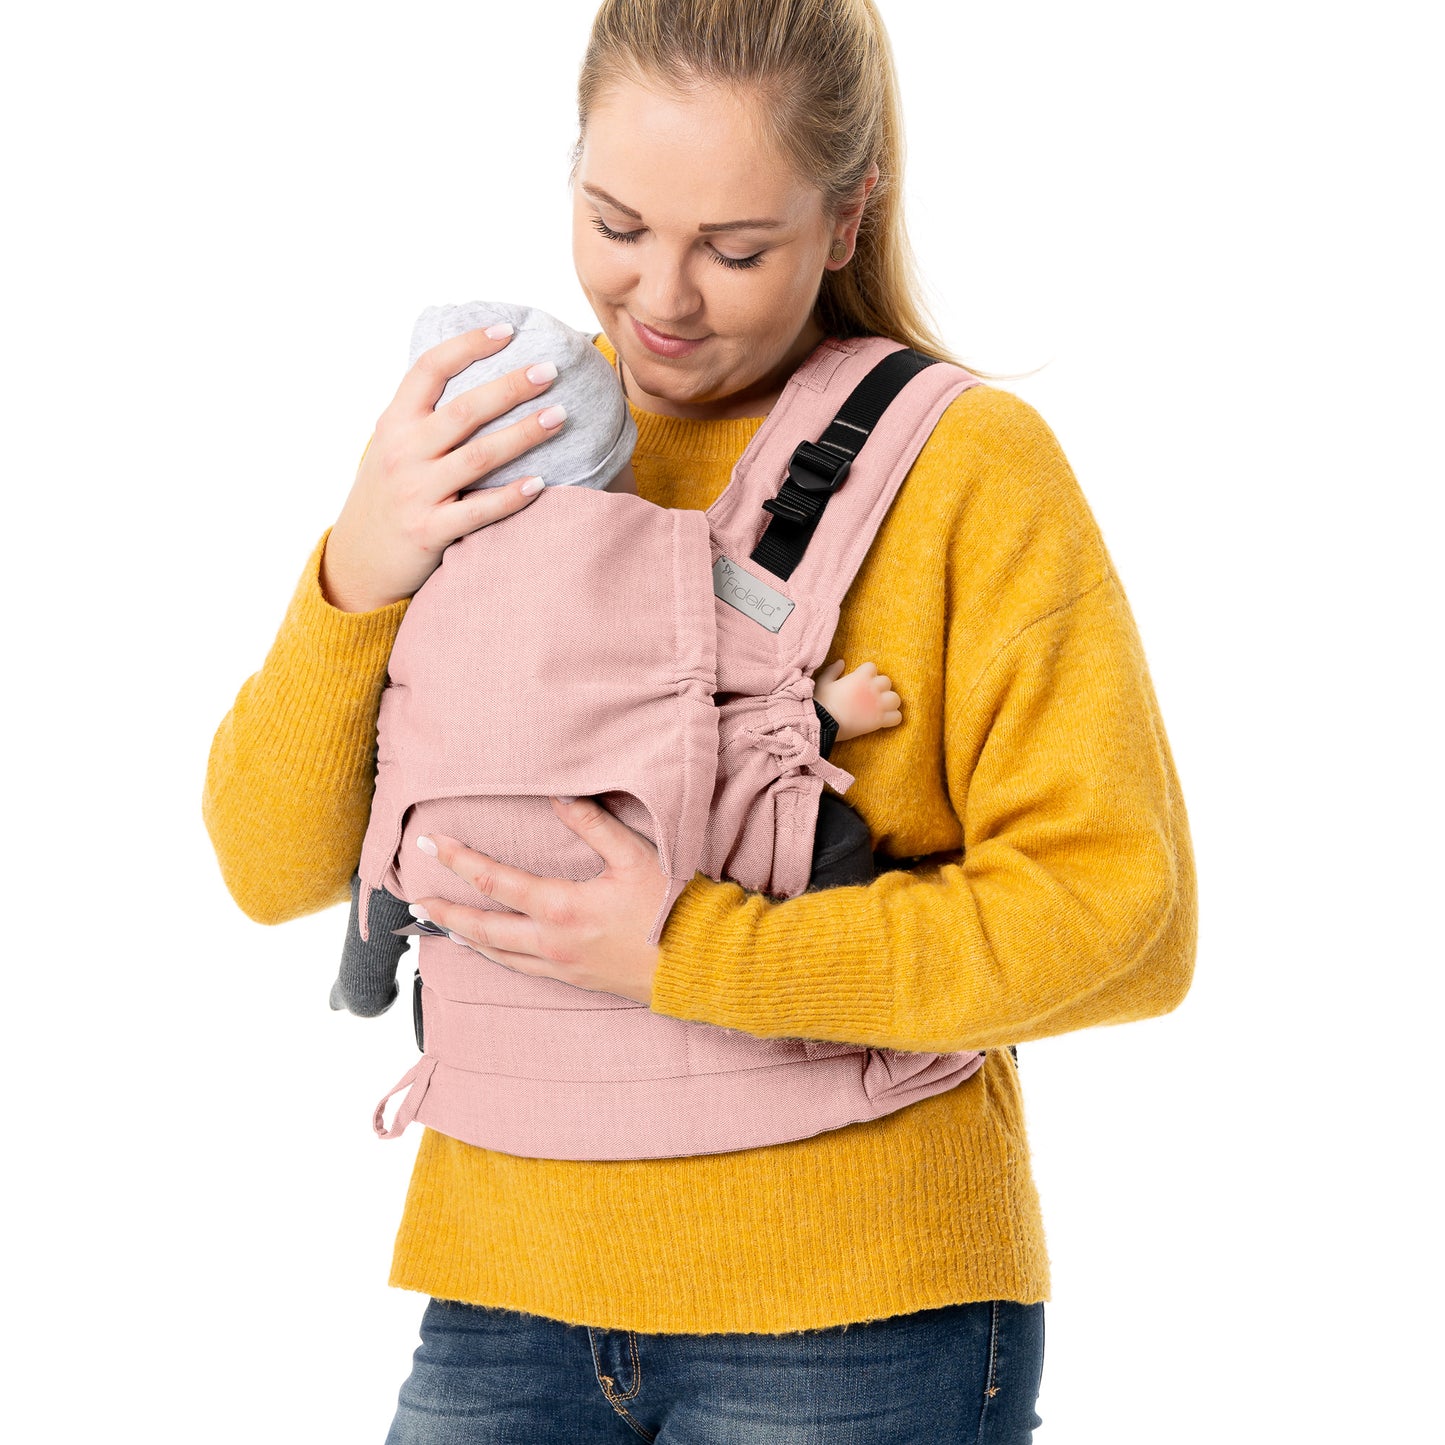 Fusion - Full-Buckle Baby Carrier - Chevron - rose